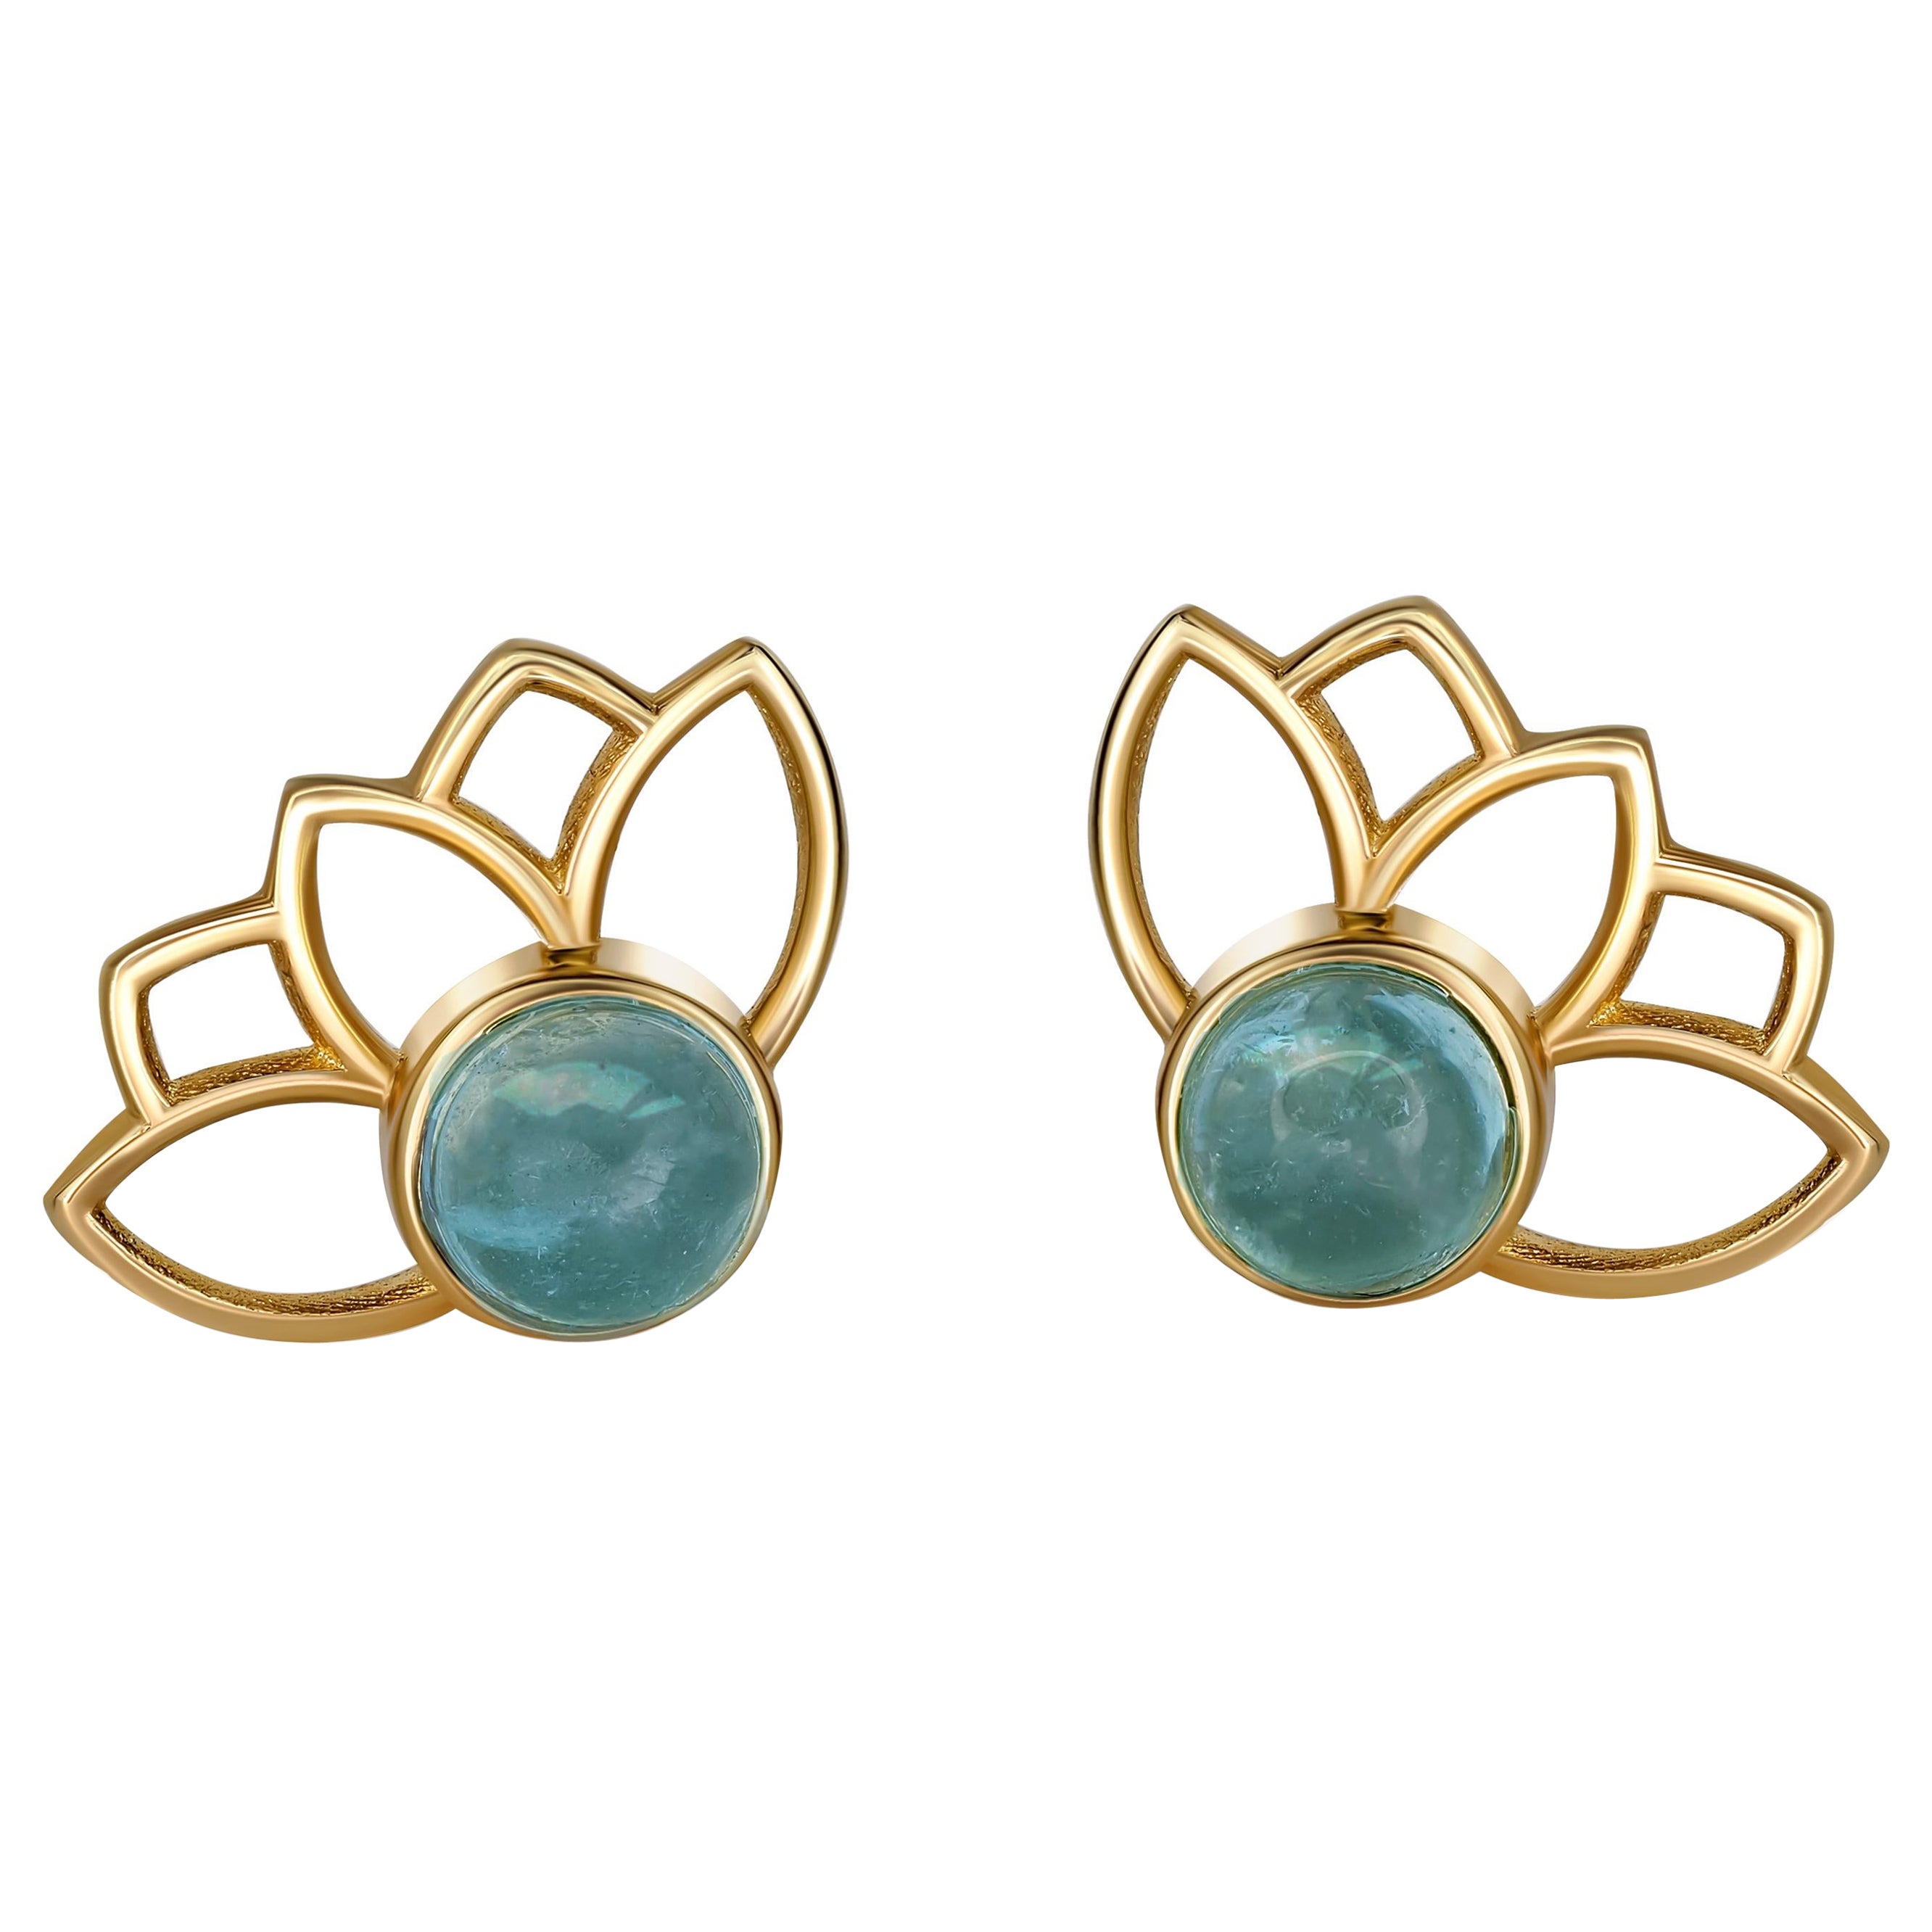 Lotus Earrings Studs with Aquamarines in 14k Gold, Aquamarine Cab Earrings For Sale